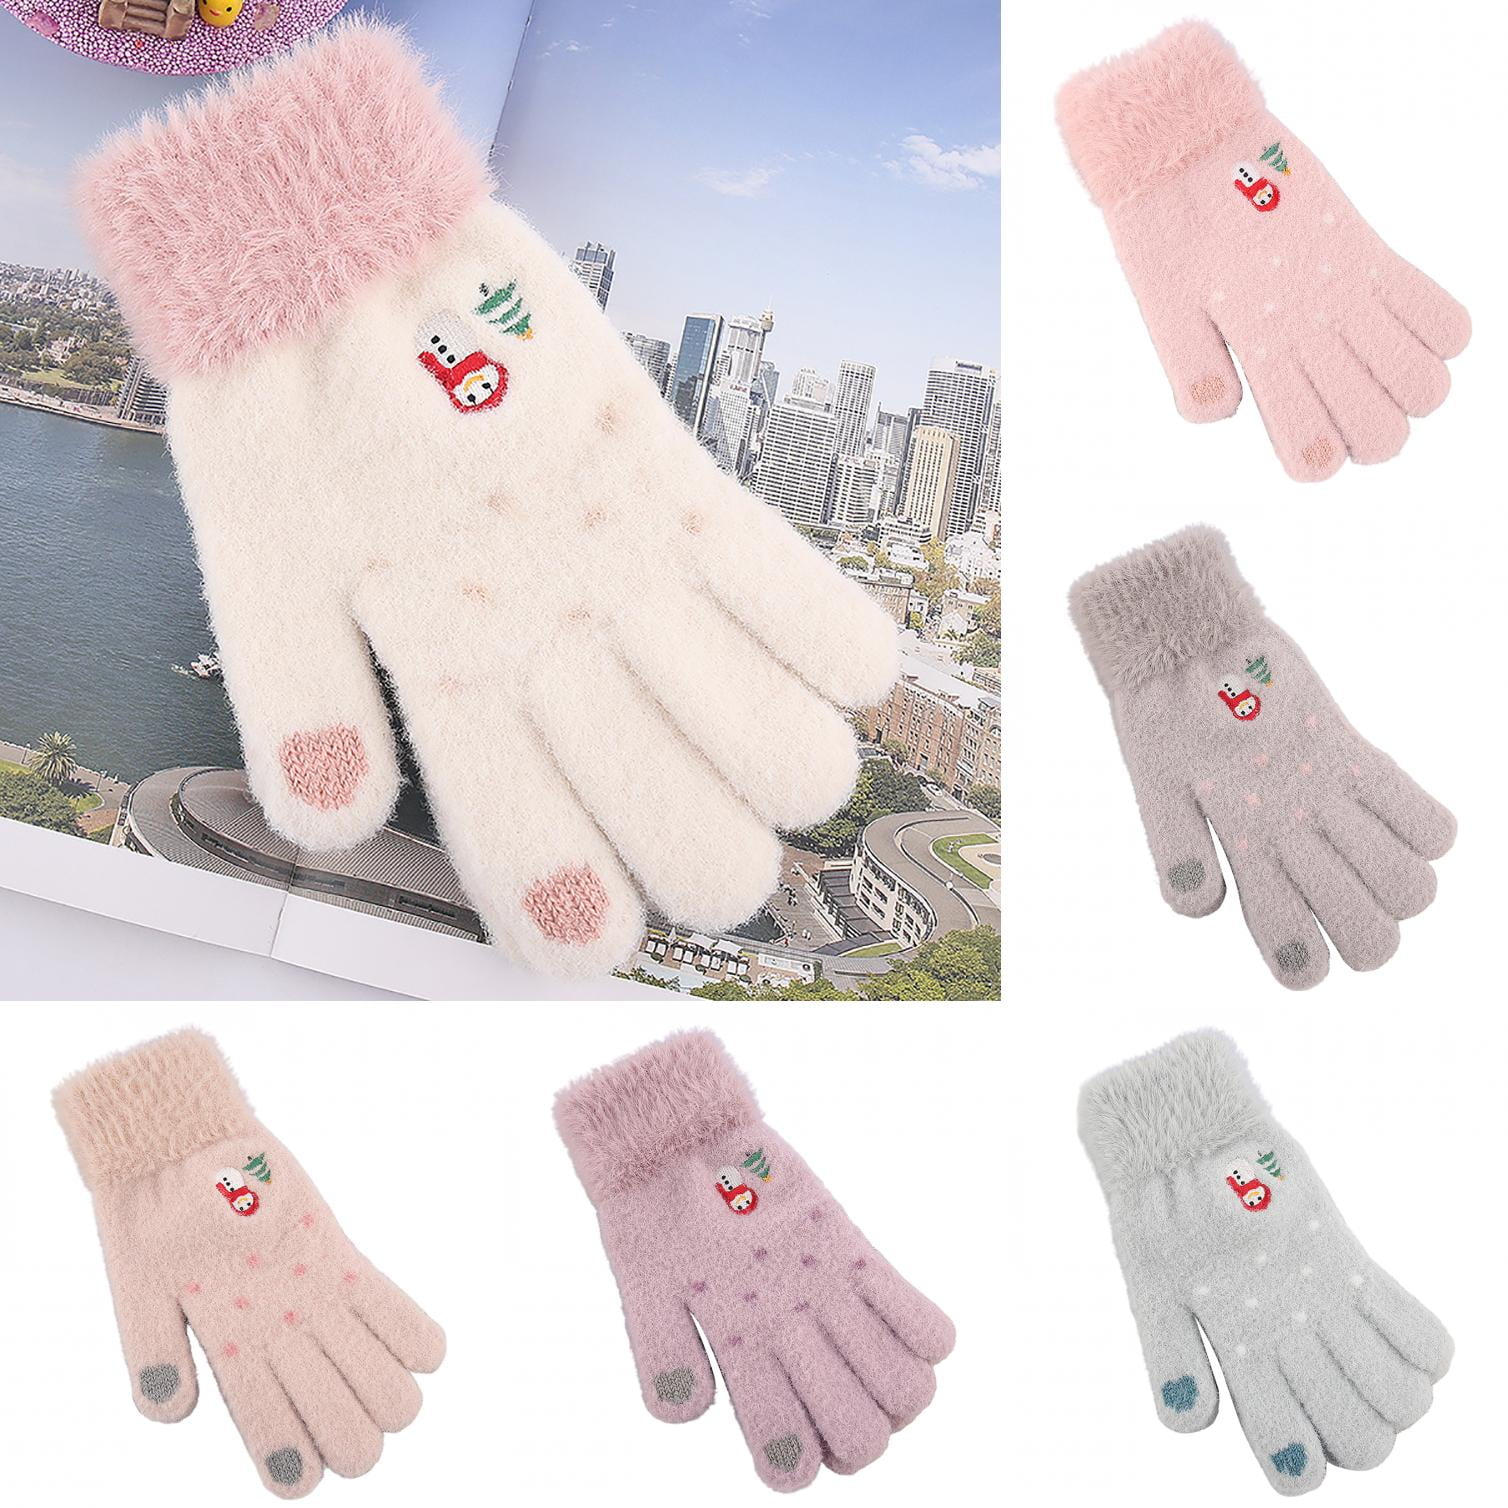 Toddler Baby Winter Cutes Thicken Christmas Full Finger Mittens Warm Gloves f 